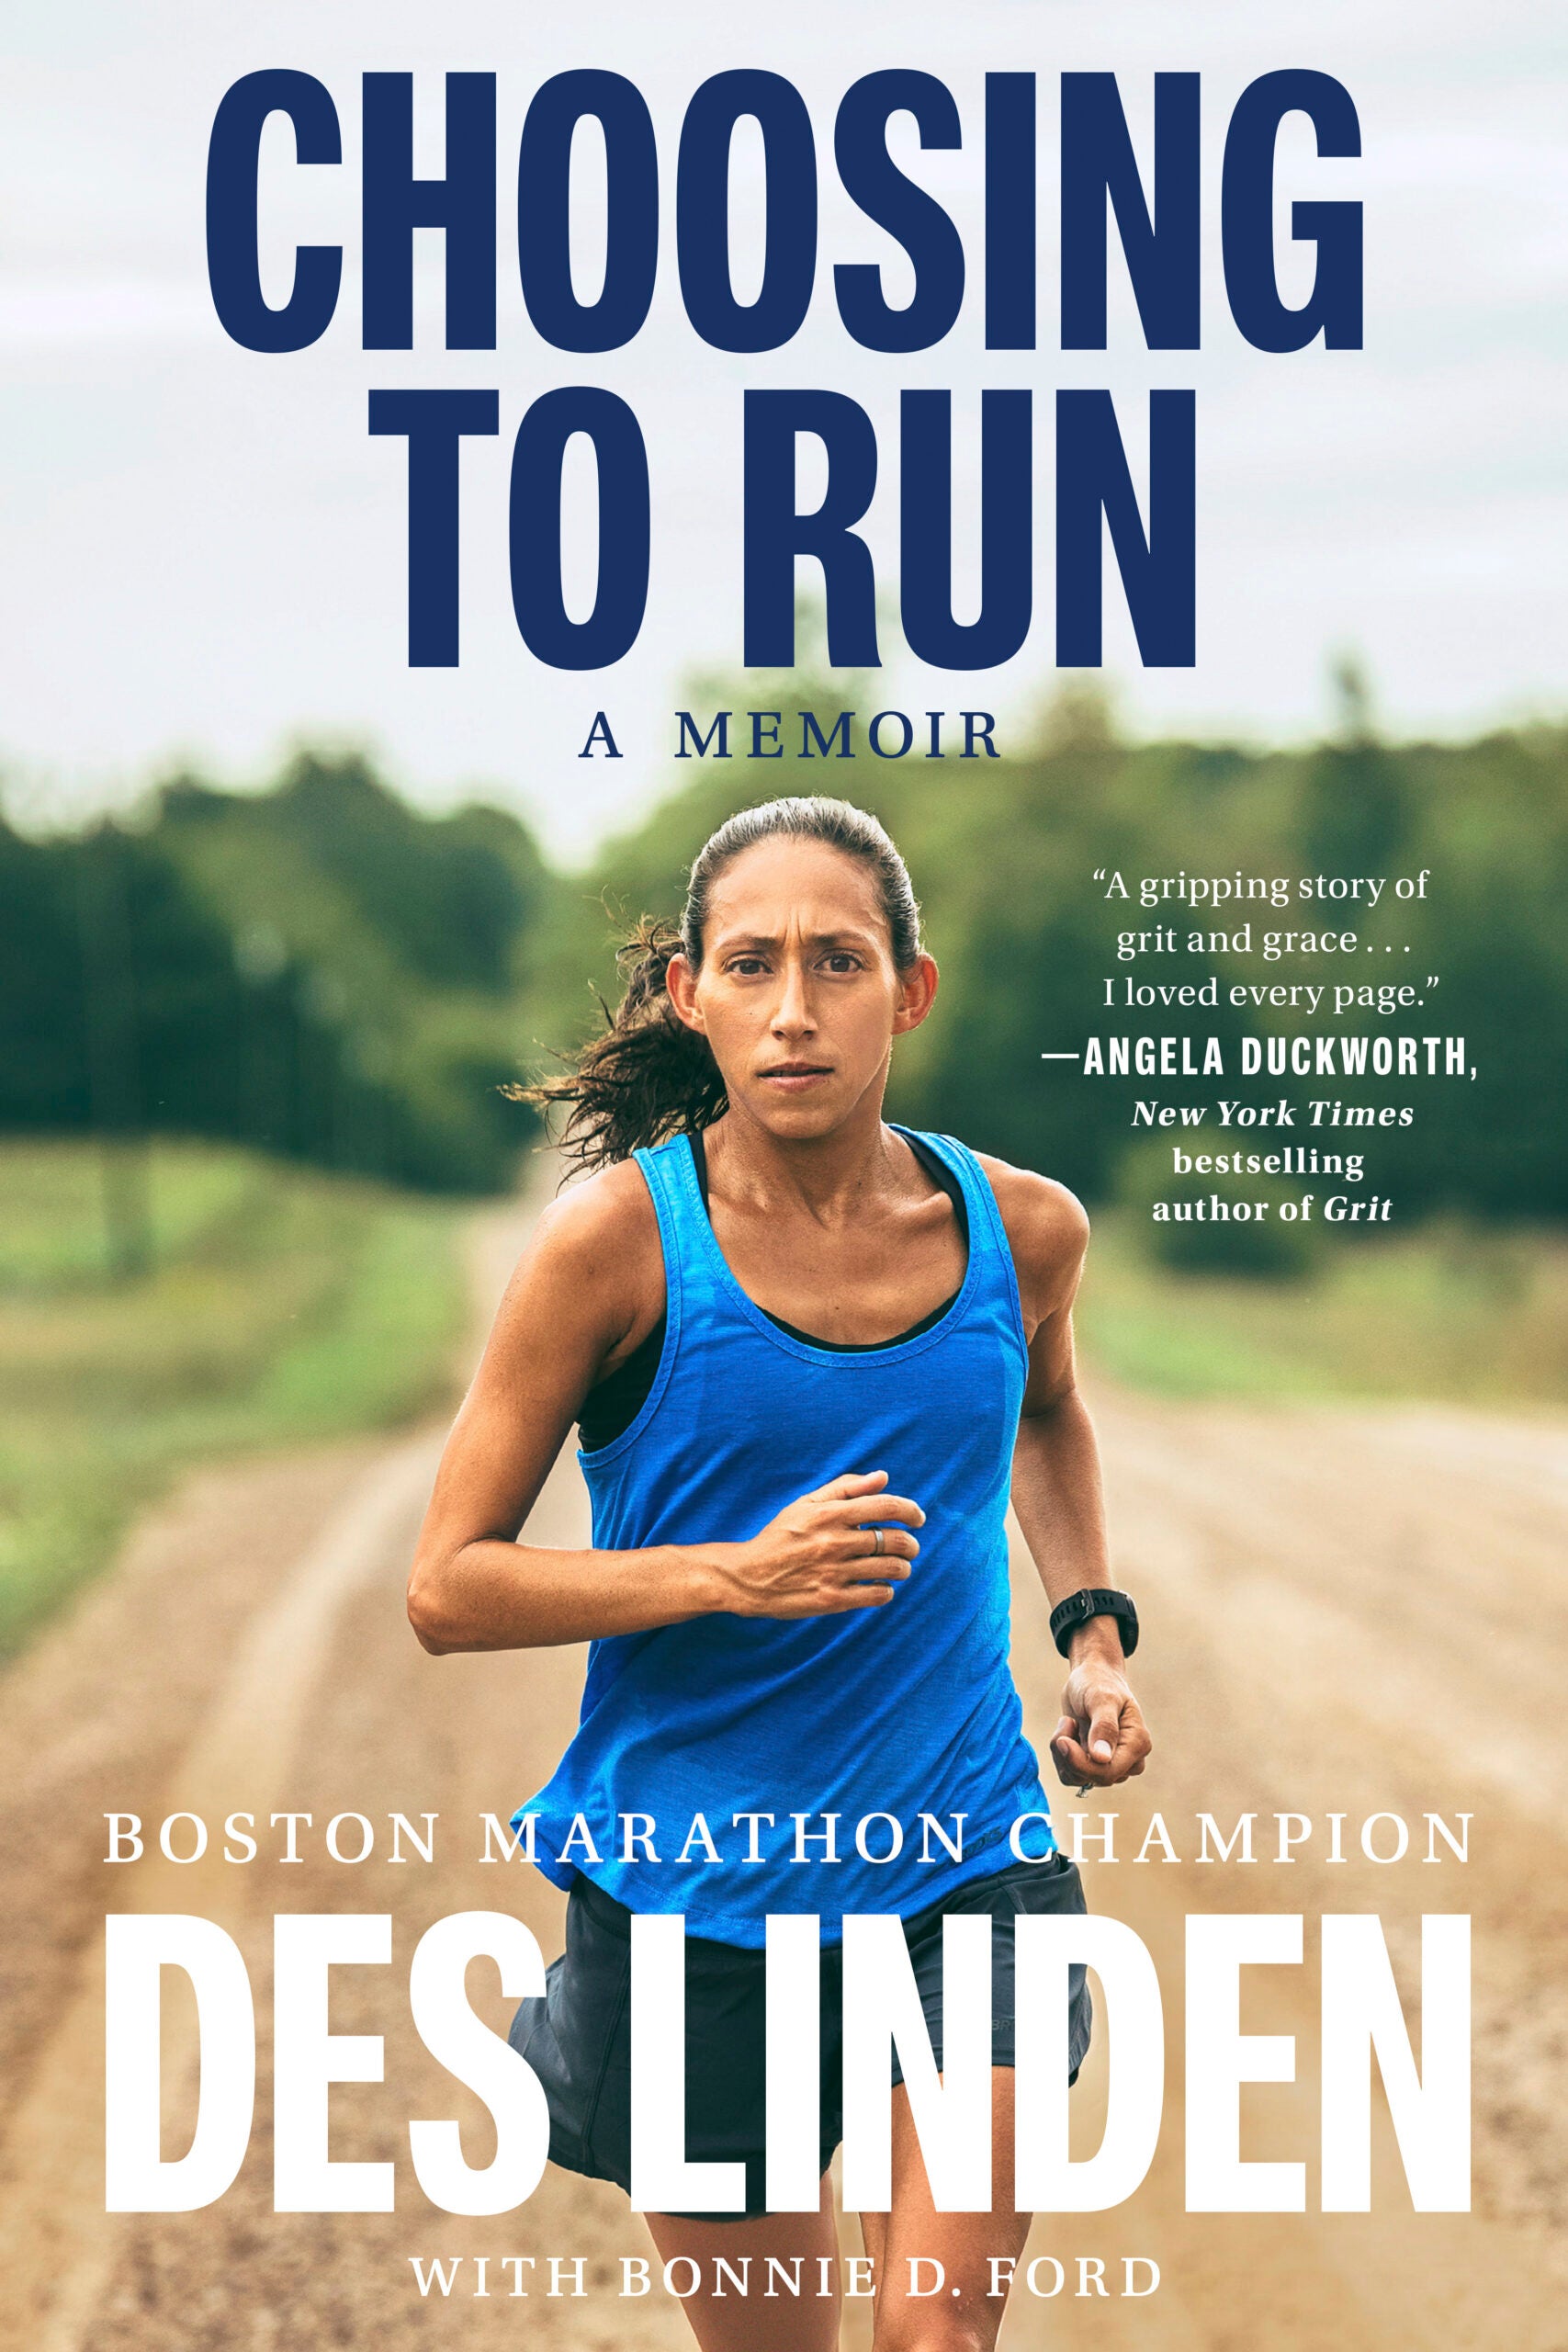 alt = This book cover image released by Dutton shows "Choosing to Run" by Des Linden.